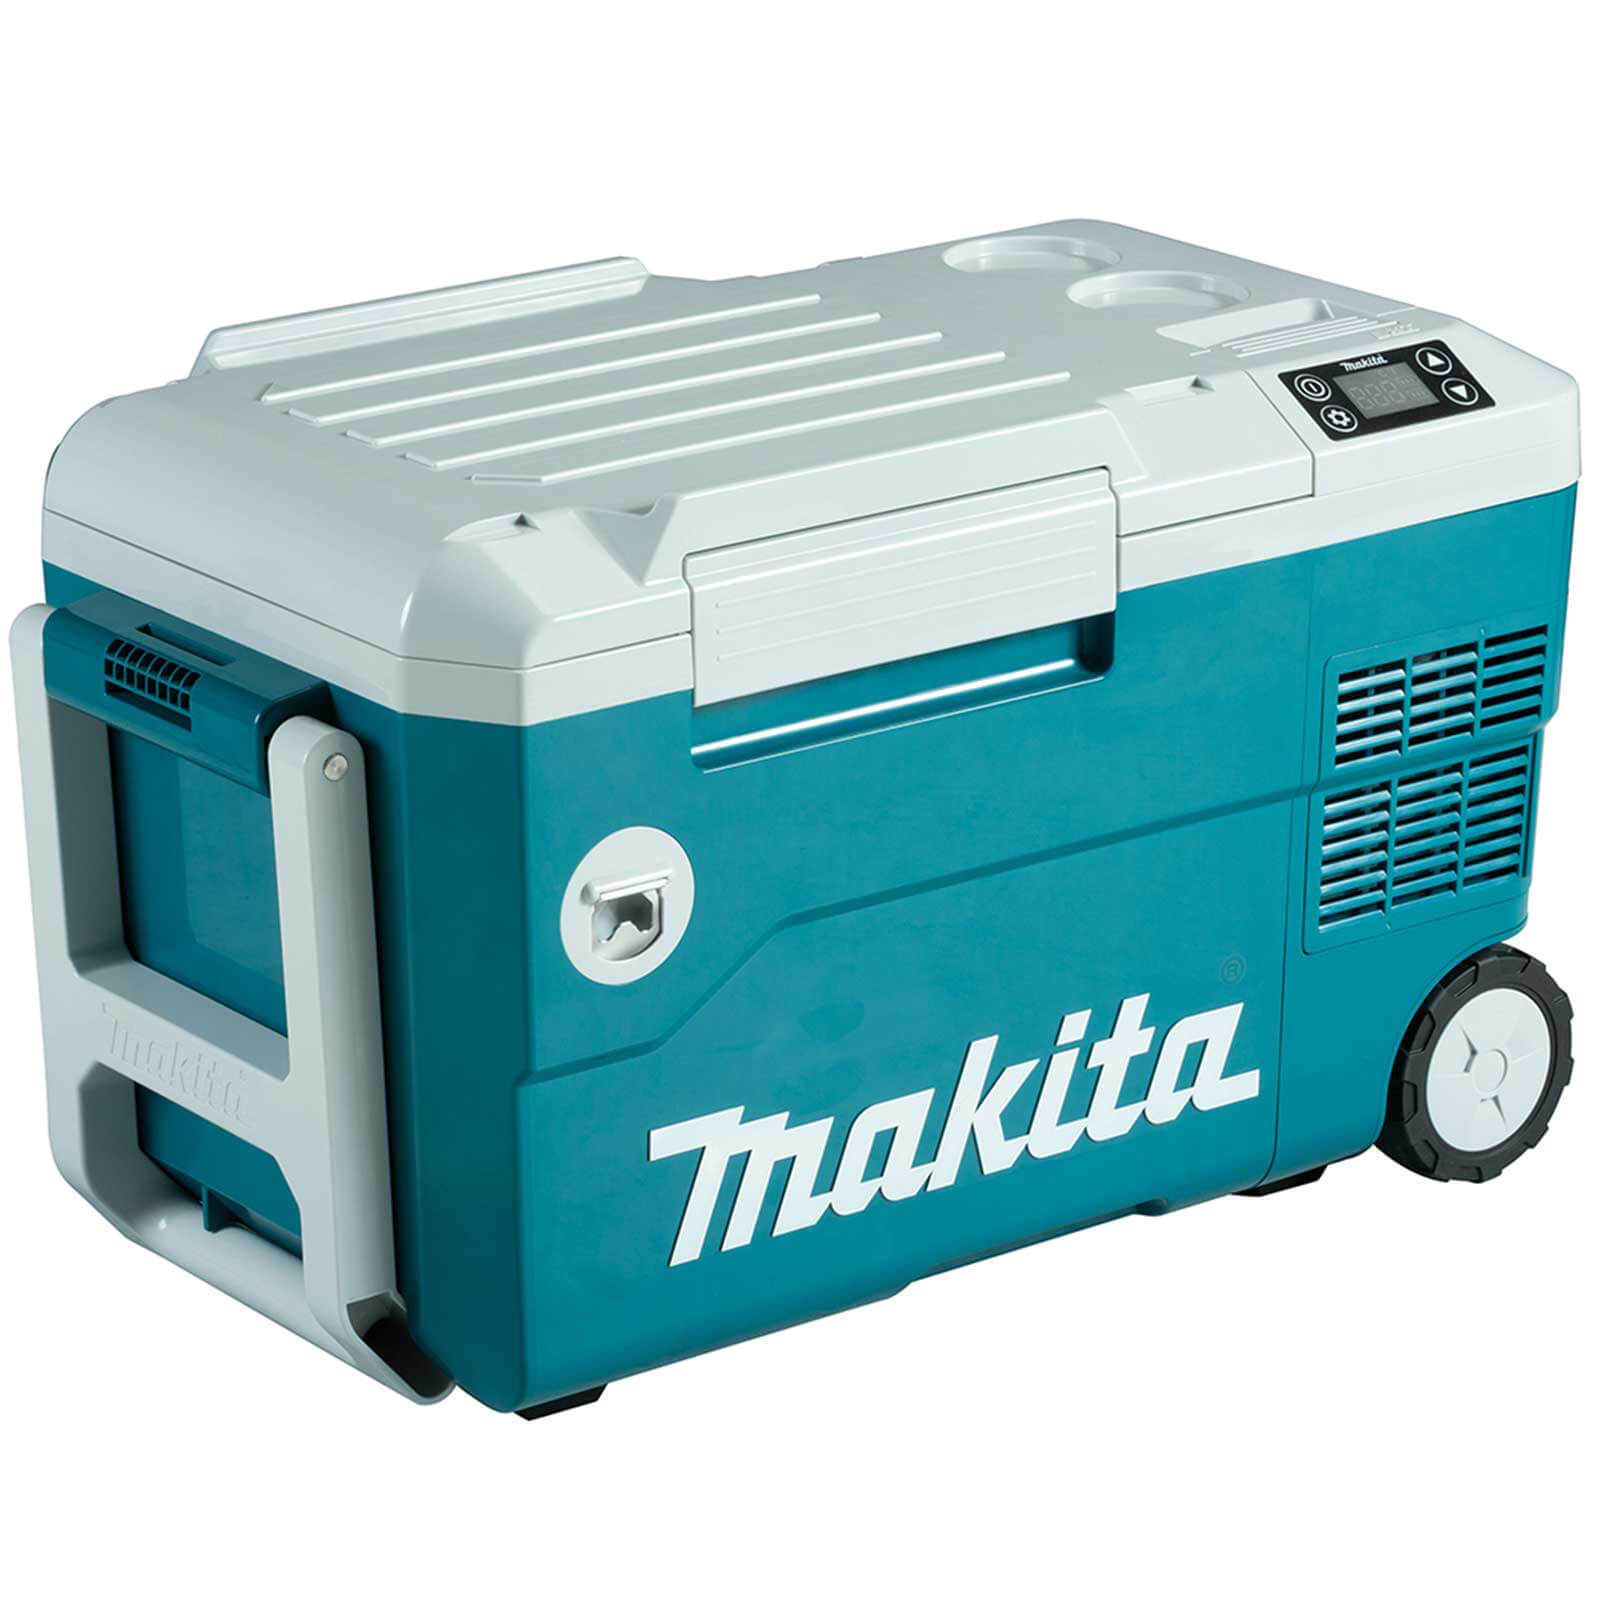 Photo of Makita Dcw180 18v Lxt Cordless Drinks Cooler And Warmer Box